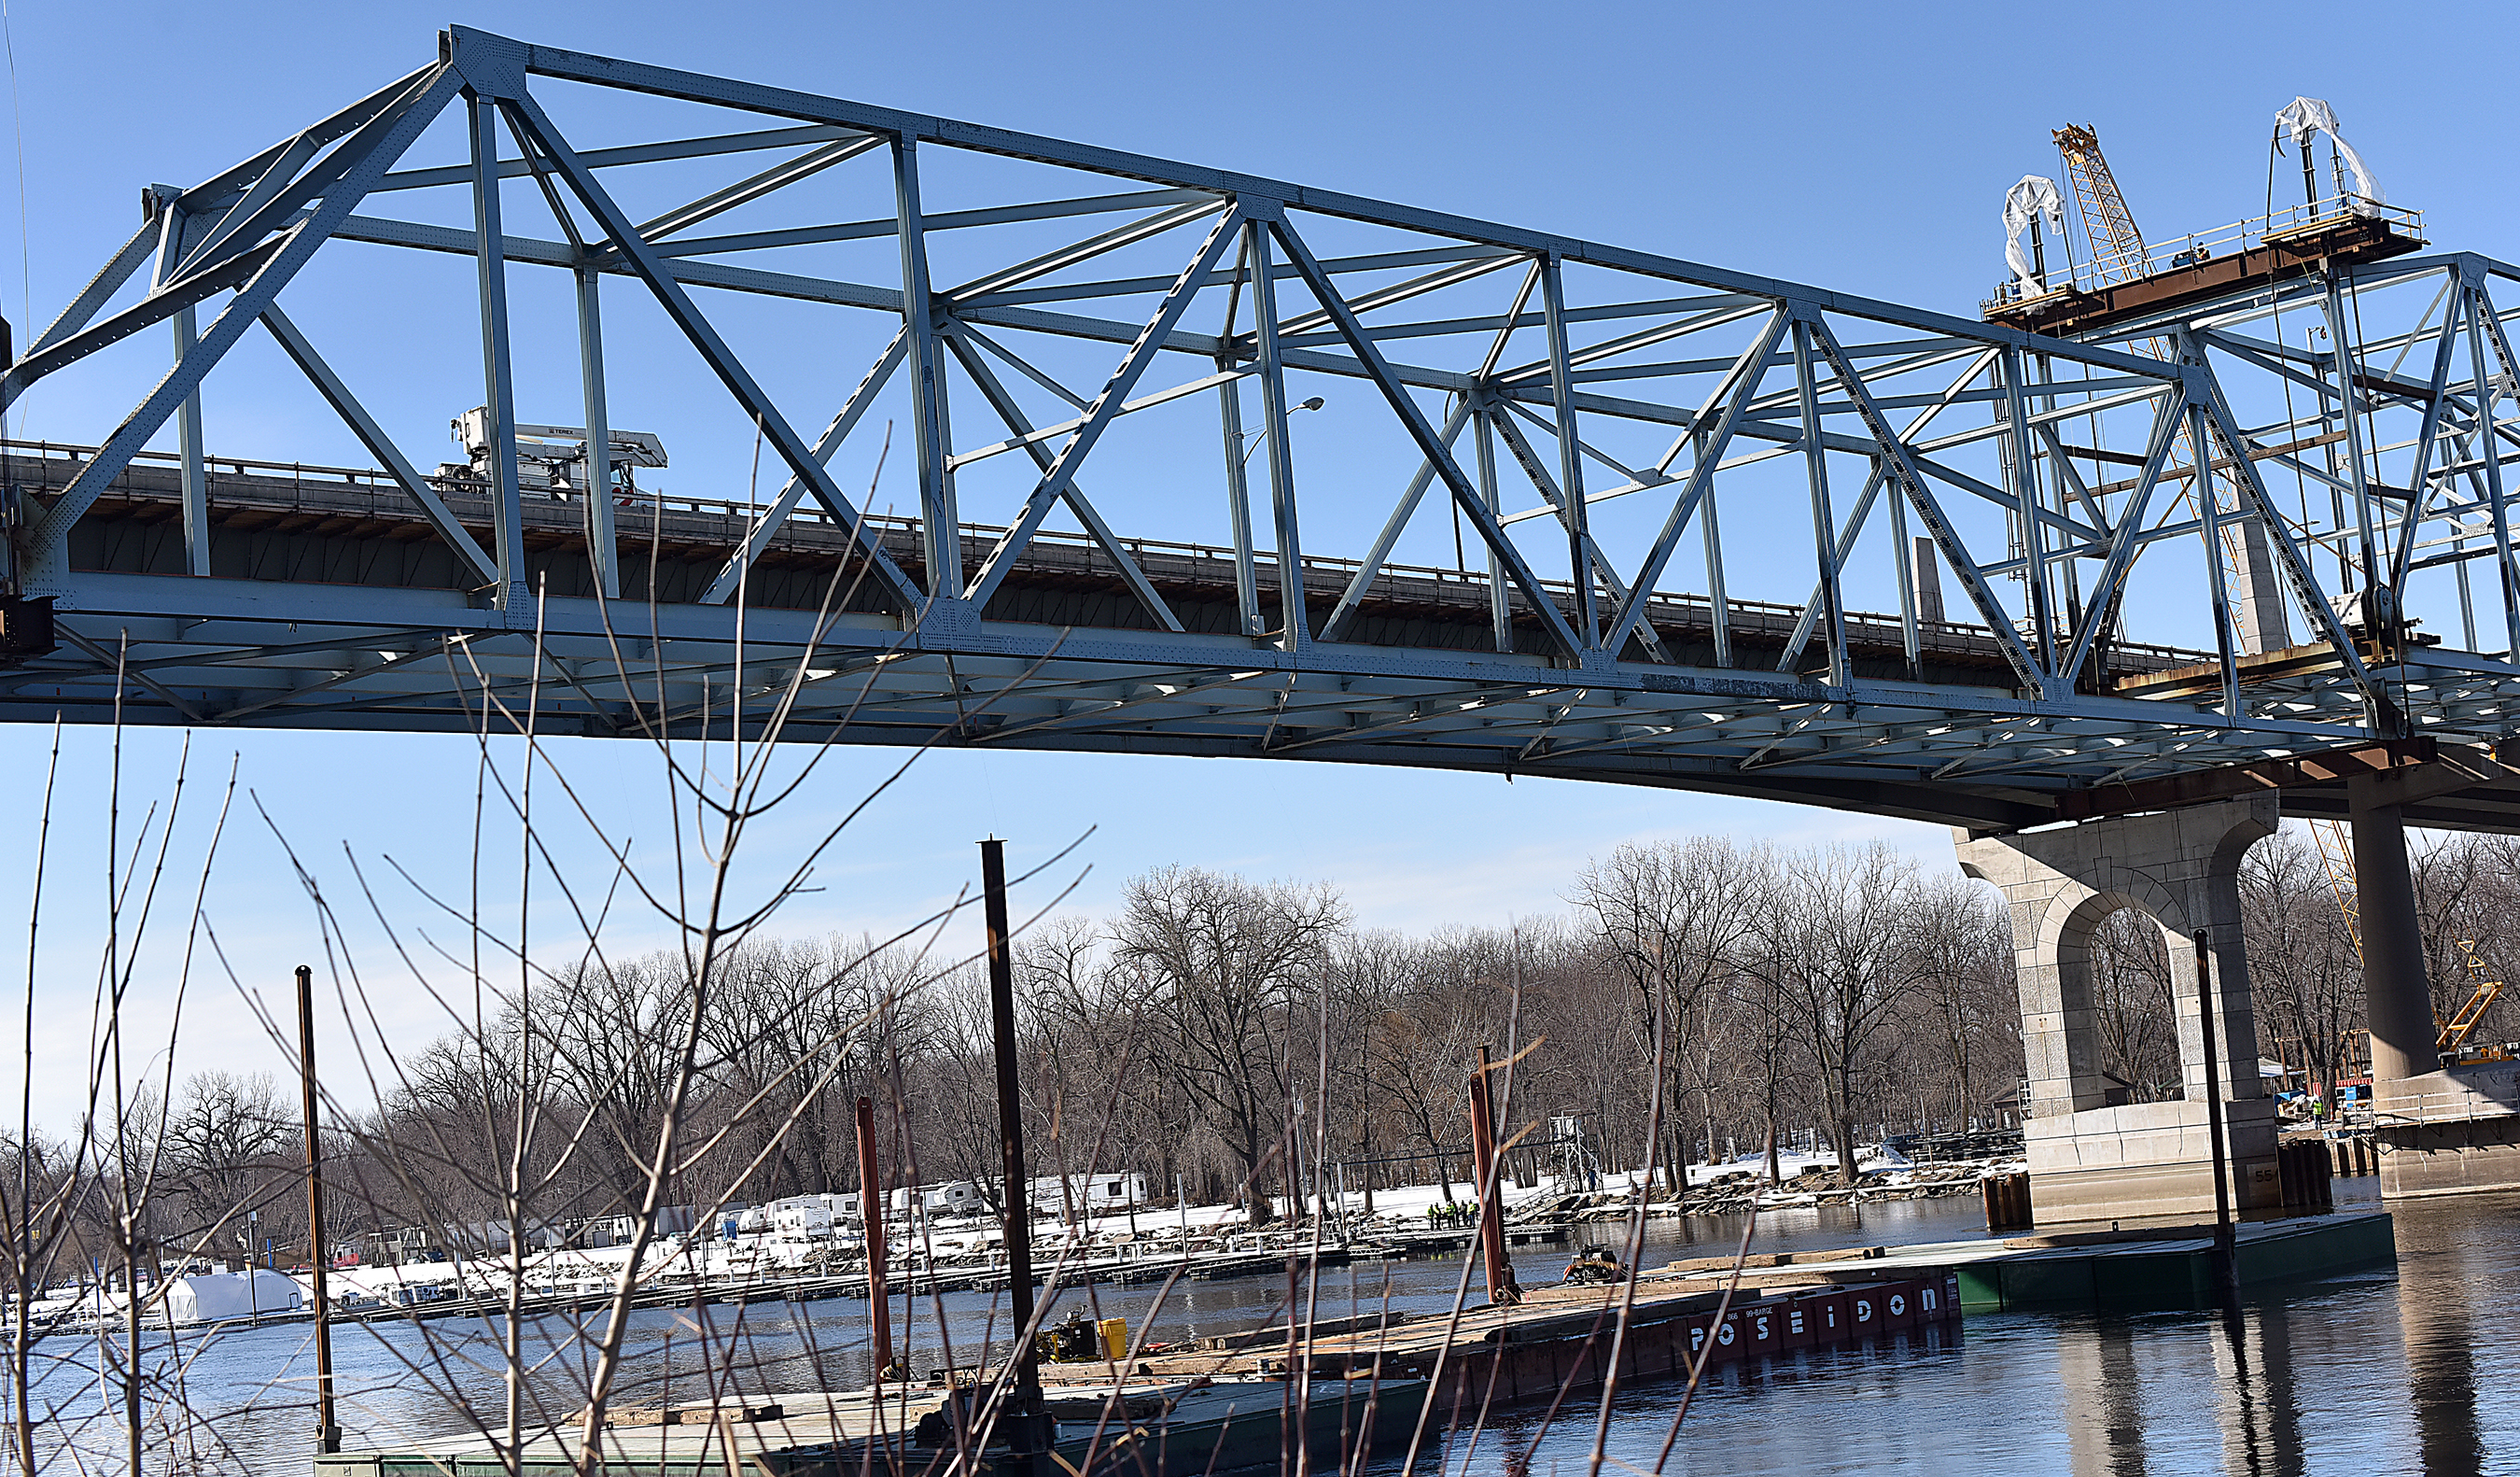 Photo: The steel framework of the bridge's center span is being slowly lowered onto a barge.